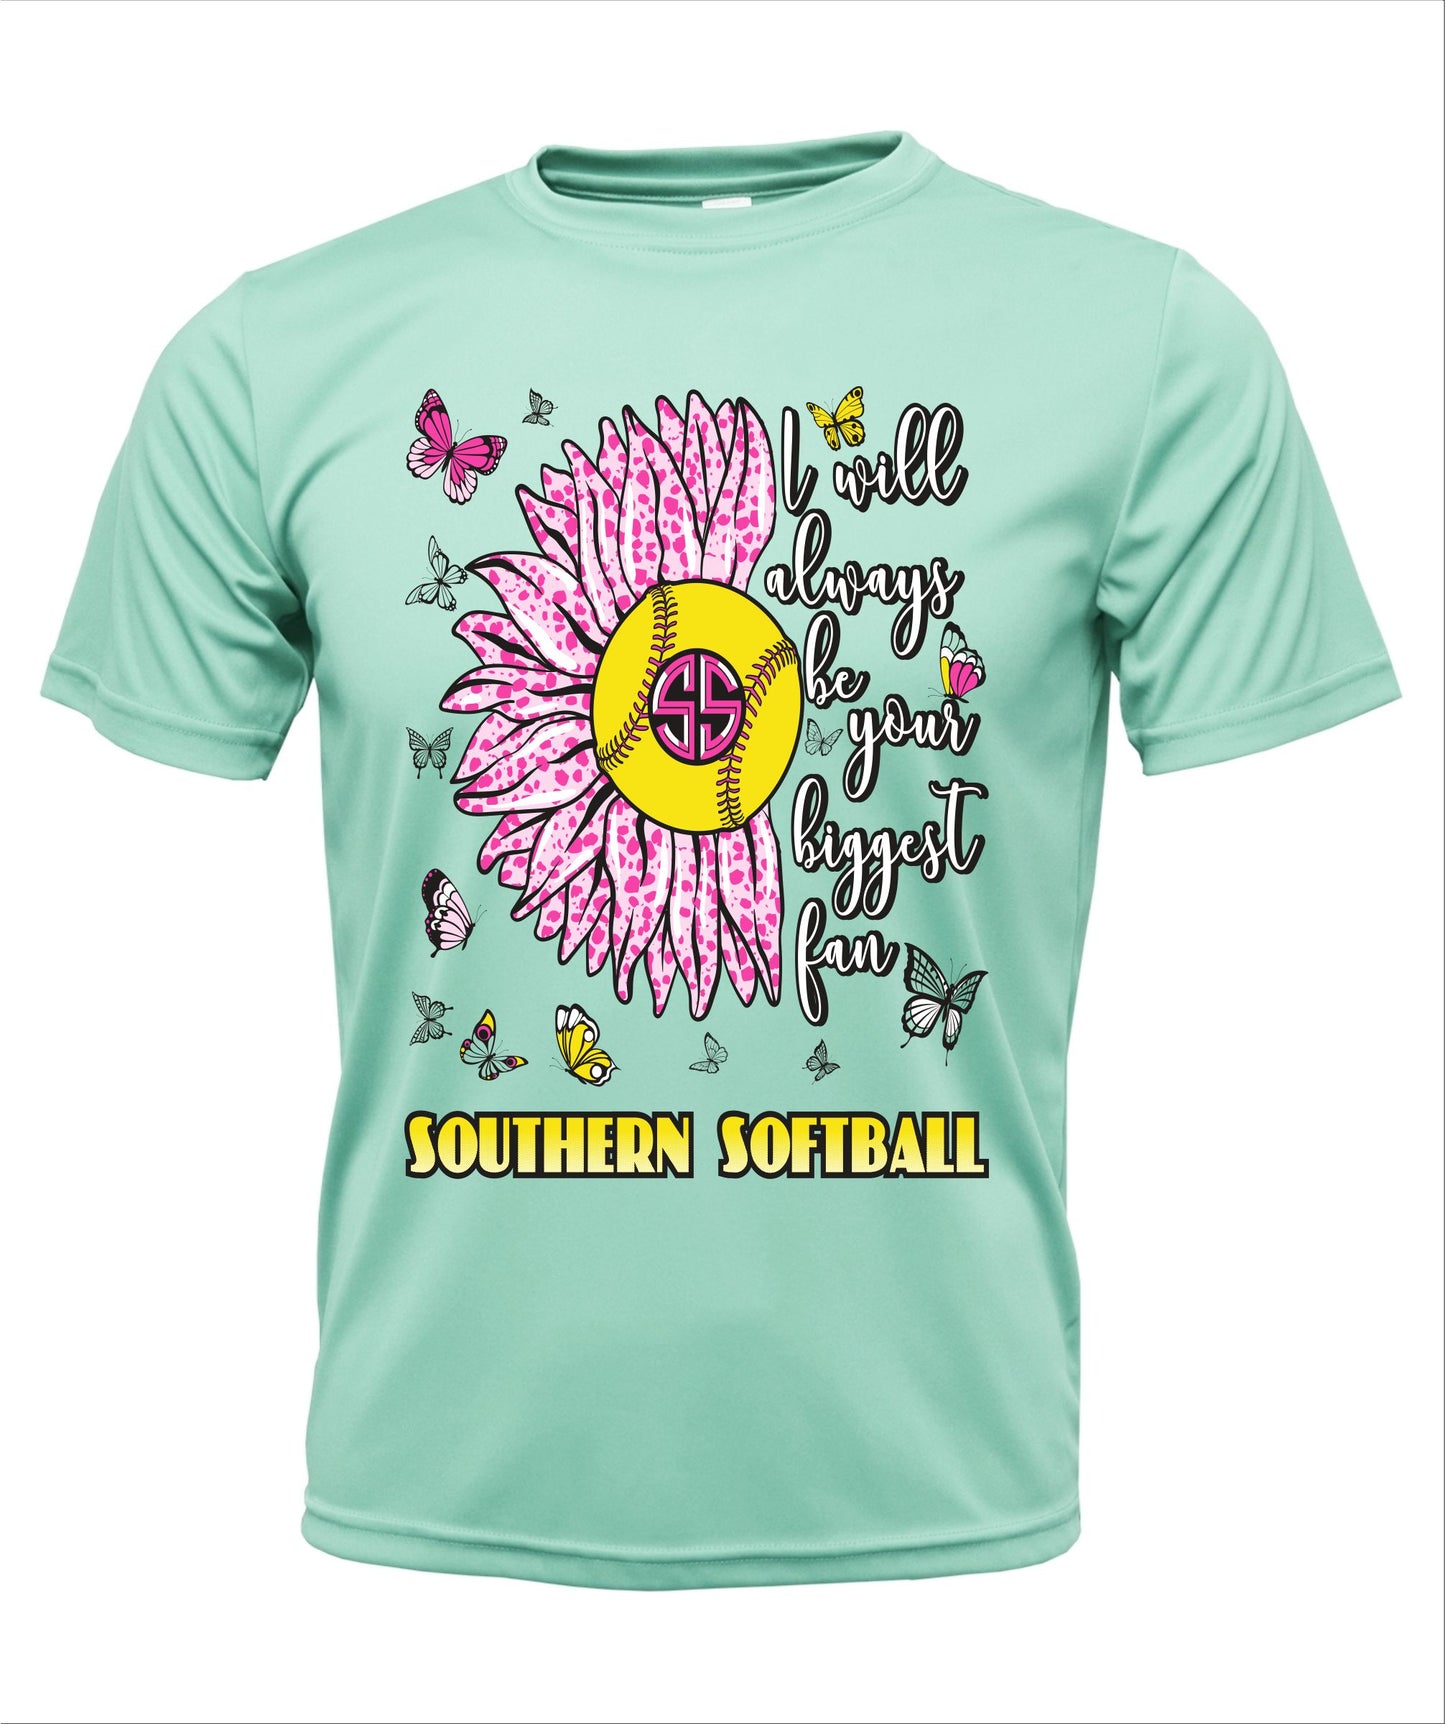 Southern Softball "Always your Biggest Fan" Cotton T-shirt